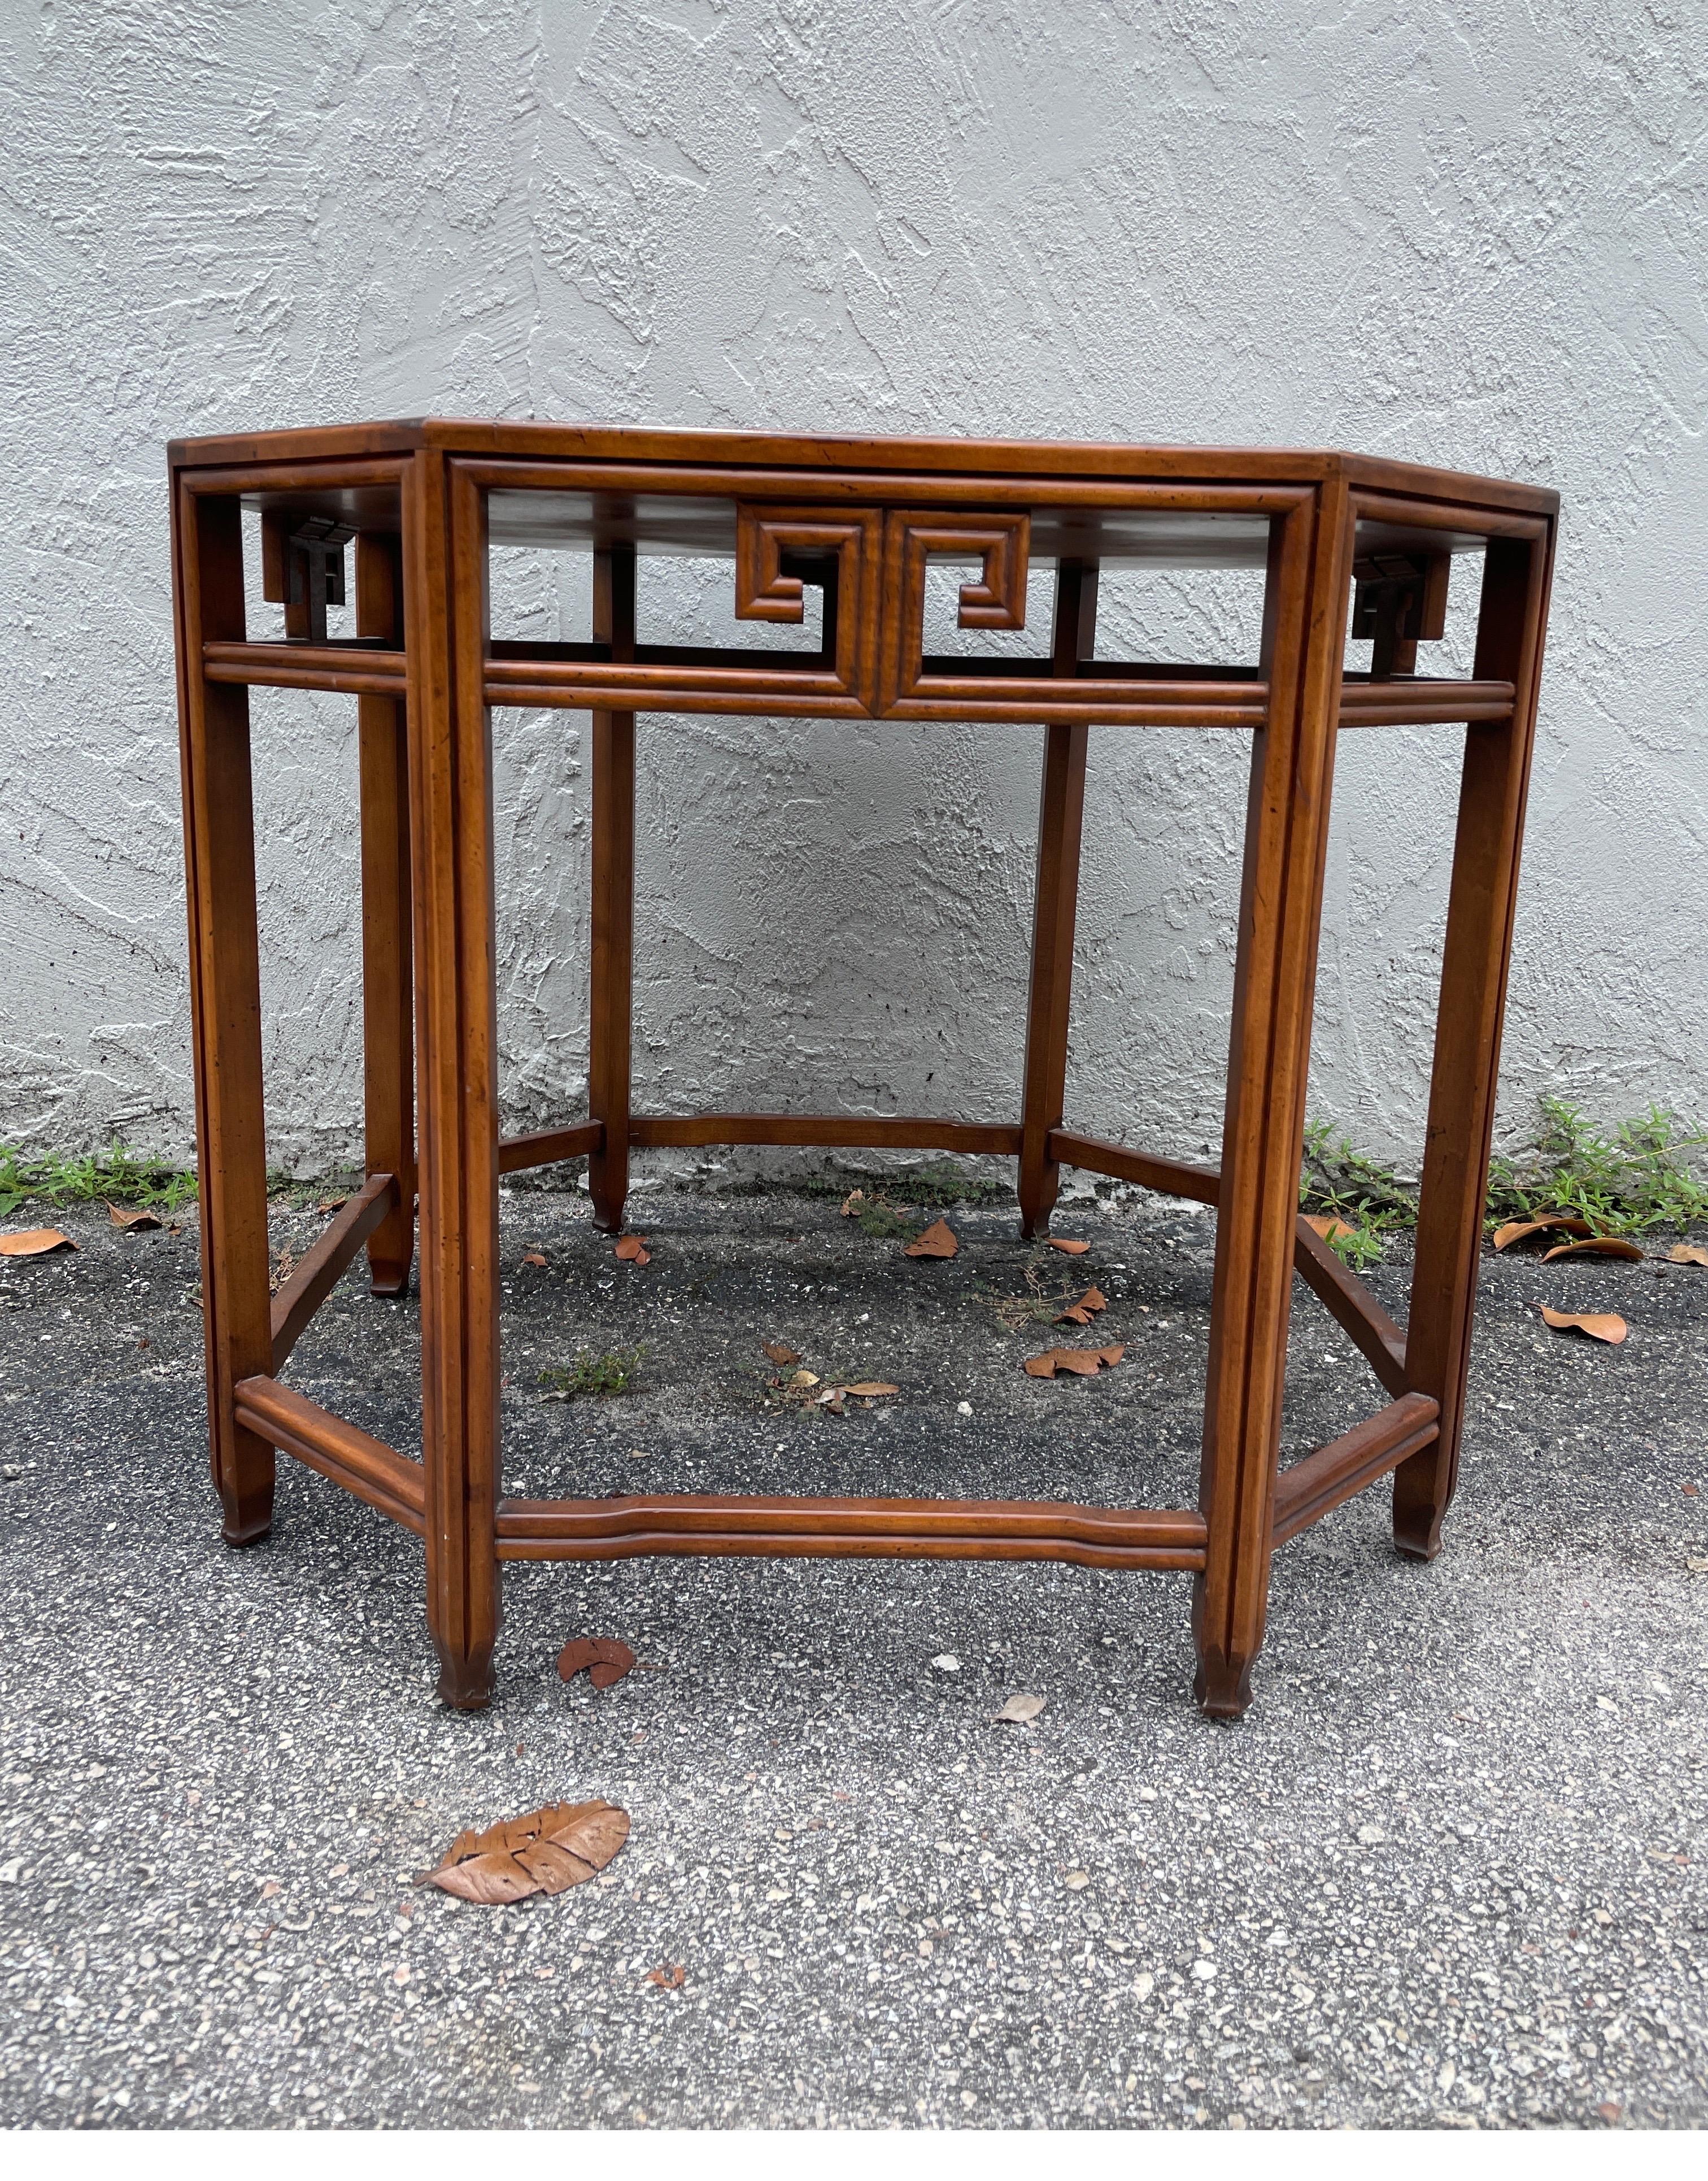 Vintage octagon chinoiserie side table by Iconic designer Michael Taylor for Baker Furniture Co.